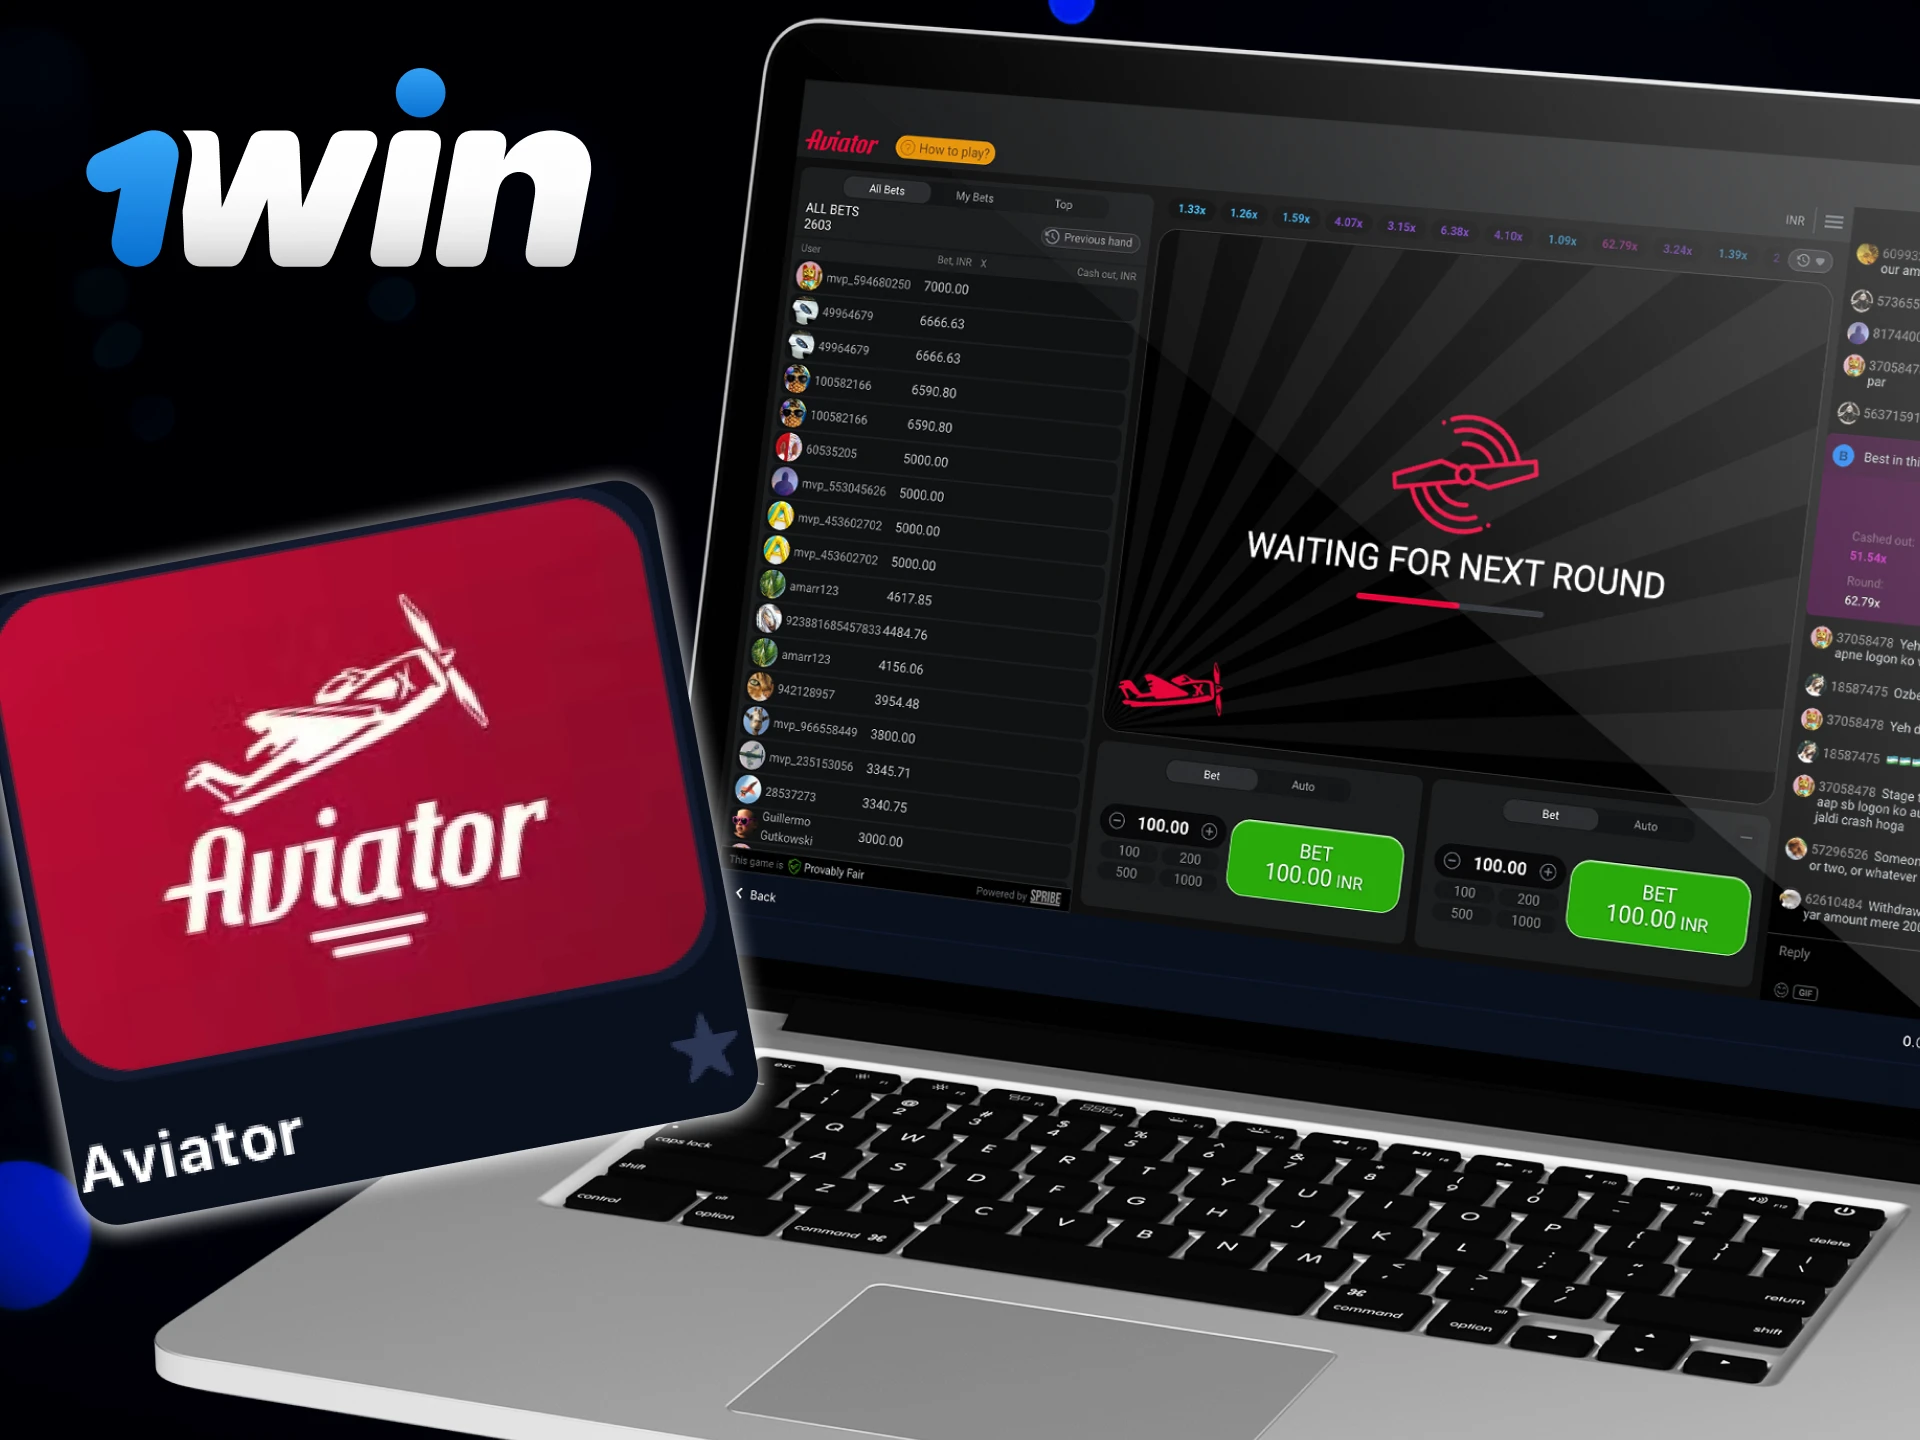 Instructions on how a user can start playing Aviator at 1Win Casino.